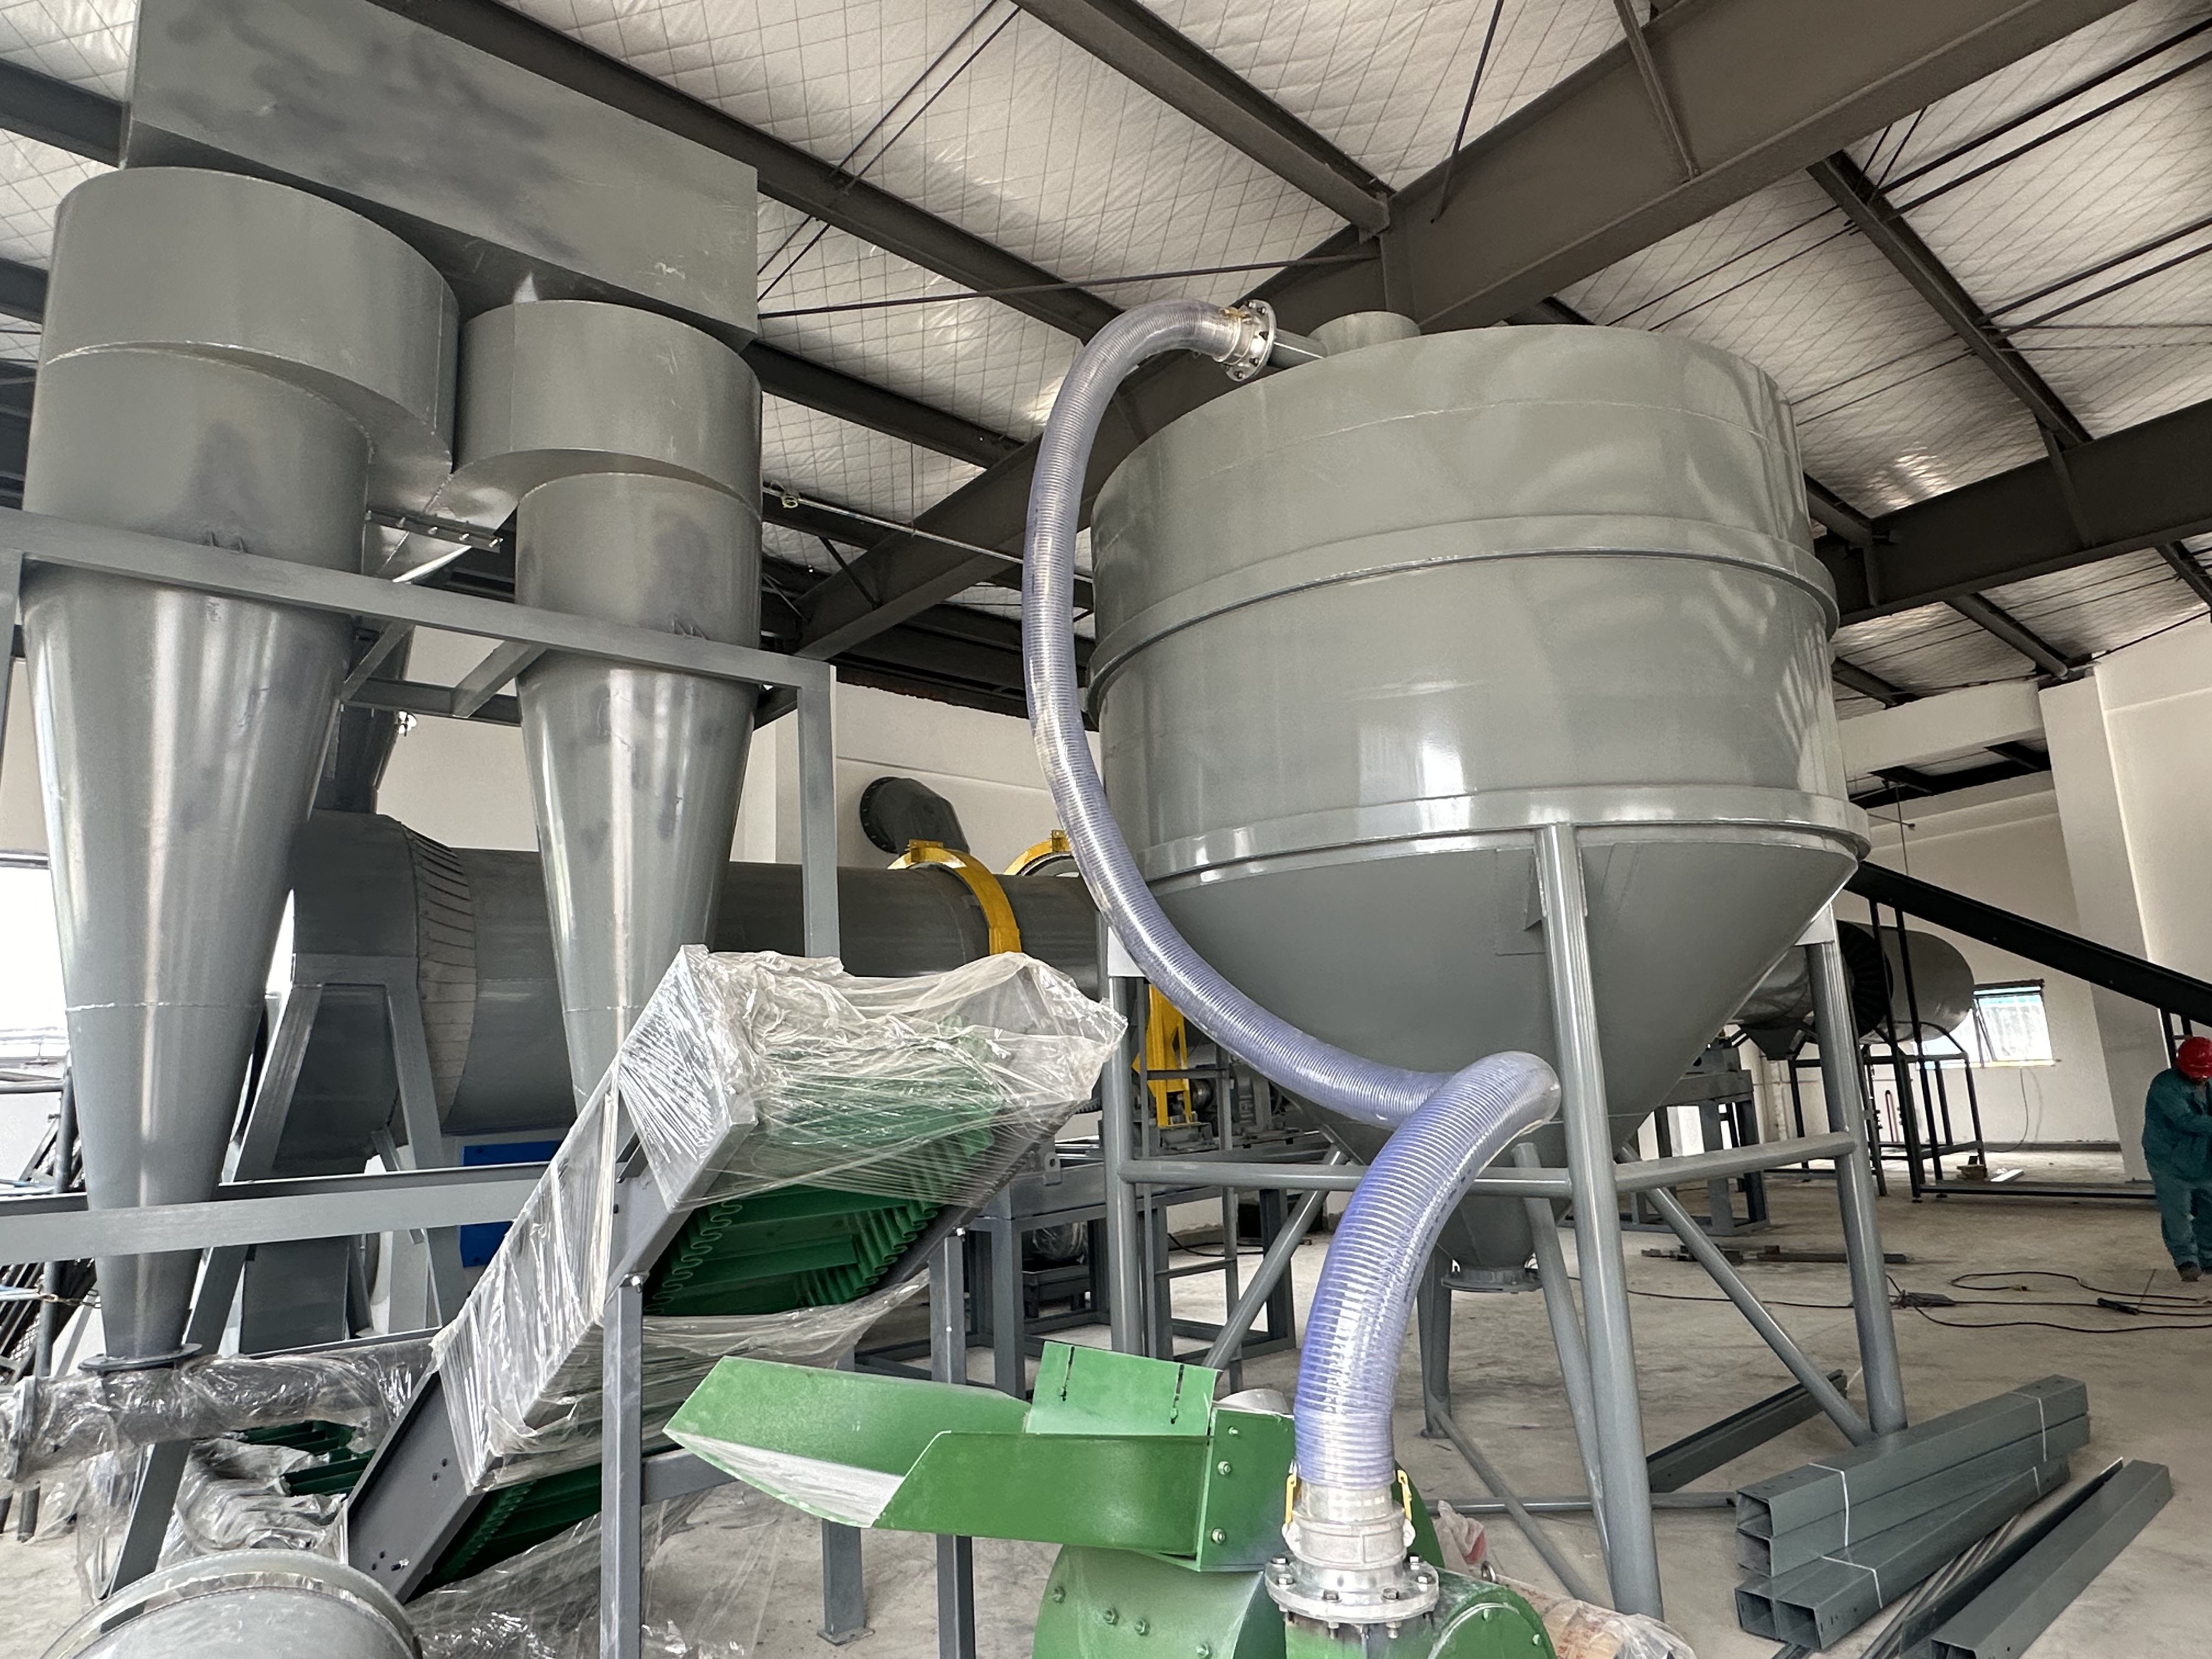 A medium-sized drum dryer for drying 50 tons egg shells per day is being assembled.